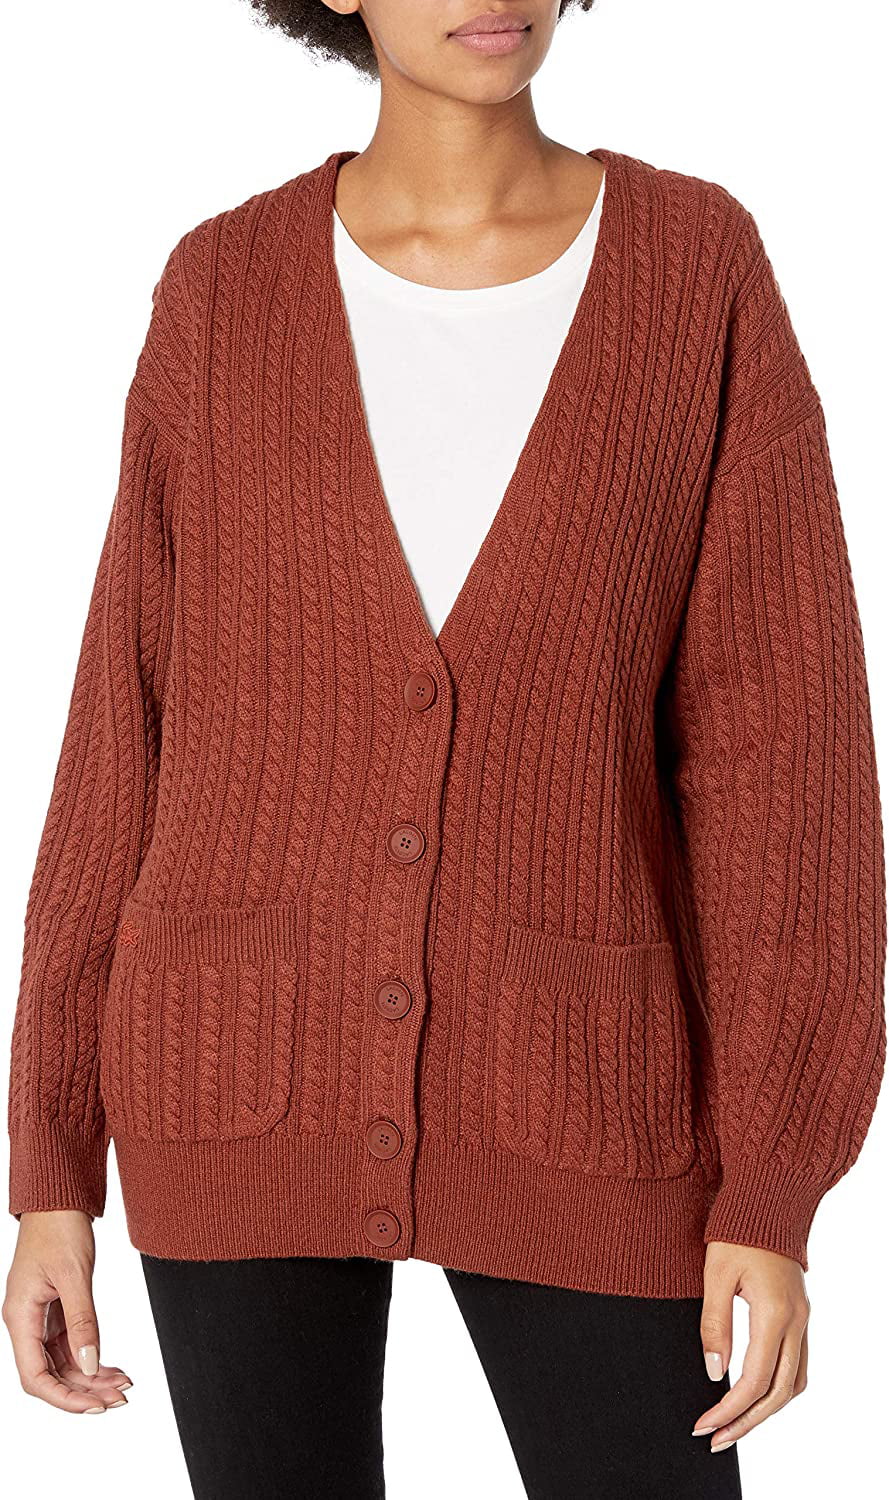 Lacoste Womens Long Sleeve V-Neck Long Chunky Cable Knit Cardigan Sweater -  Walmart.com